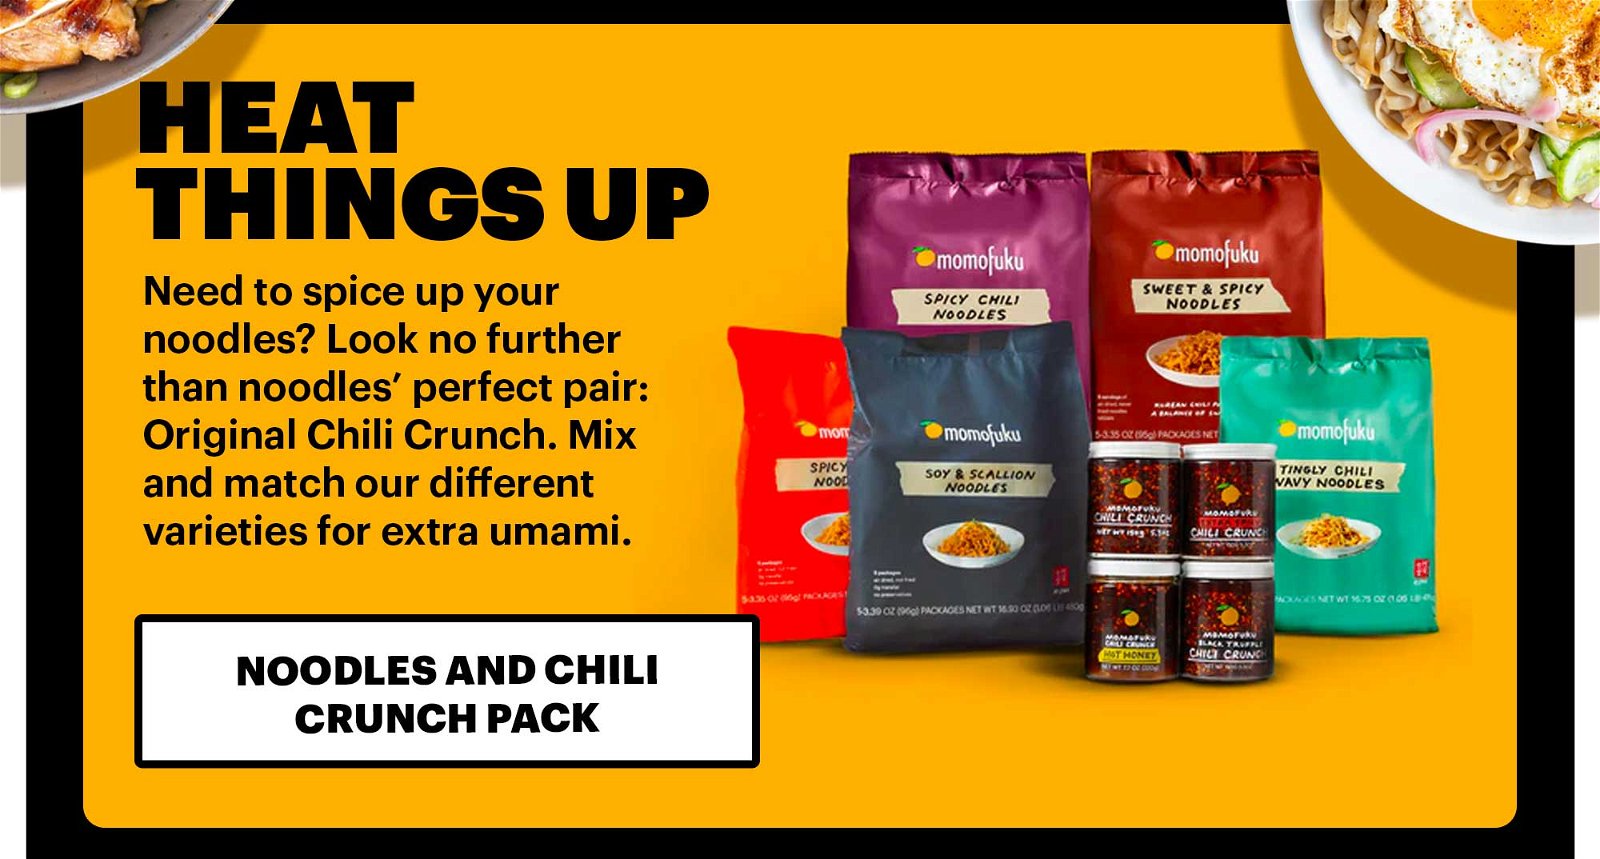 Heat things up Need to spice up your noodles? Look no further than noodles’ perfect pair: Original Chili Crunch. Mix and match our different varieties for extra umami. NOODLES AND CHILI CRUNCH PACK